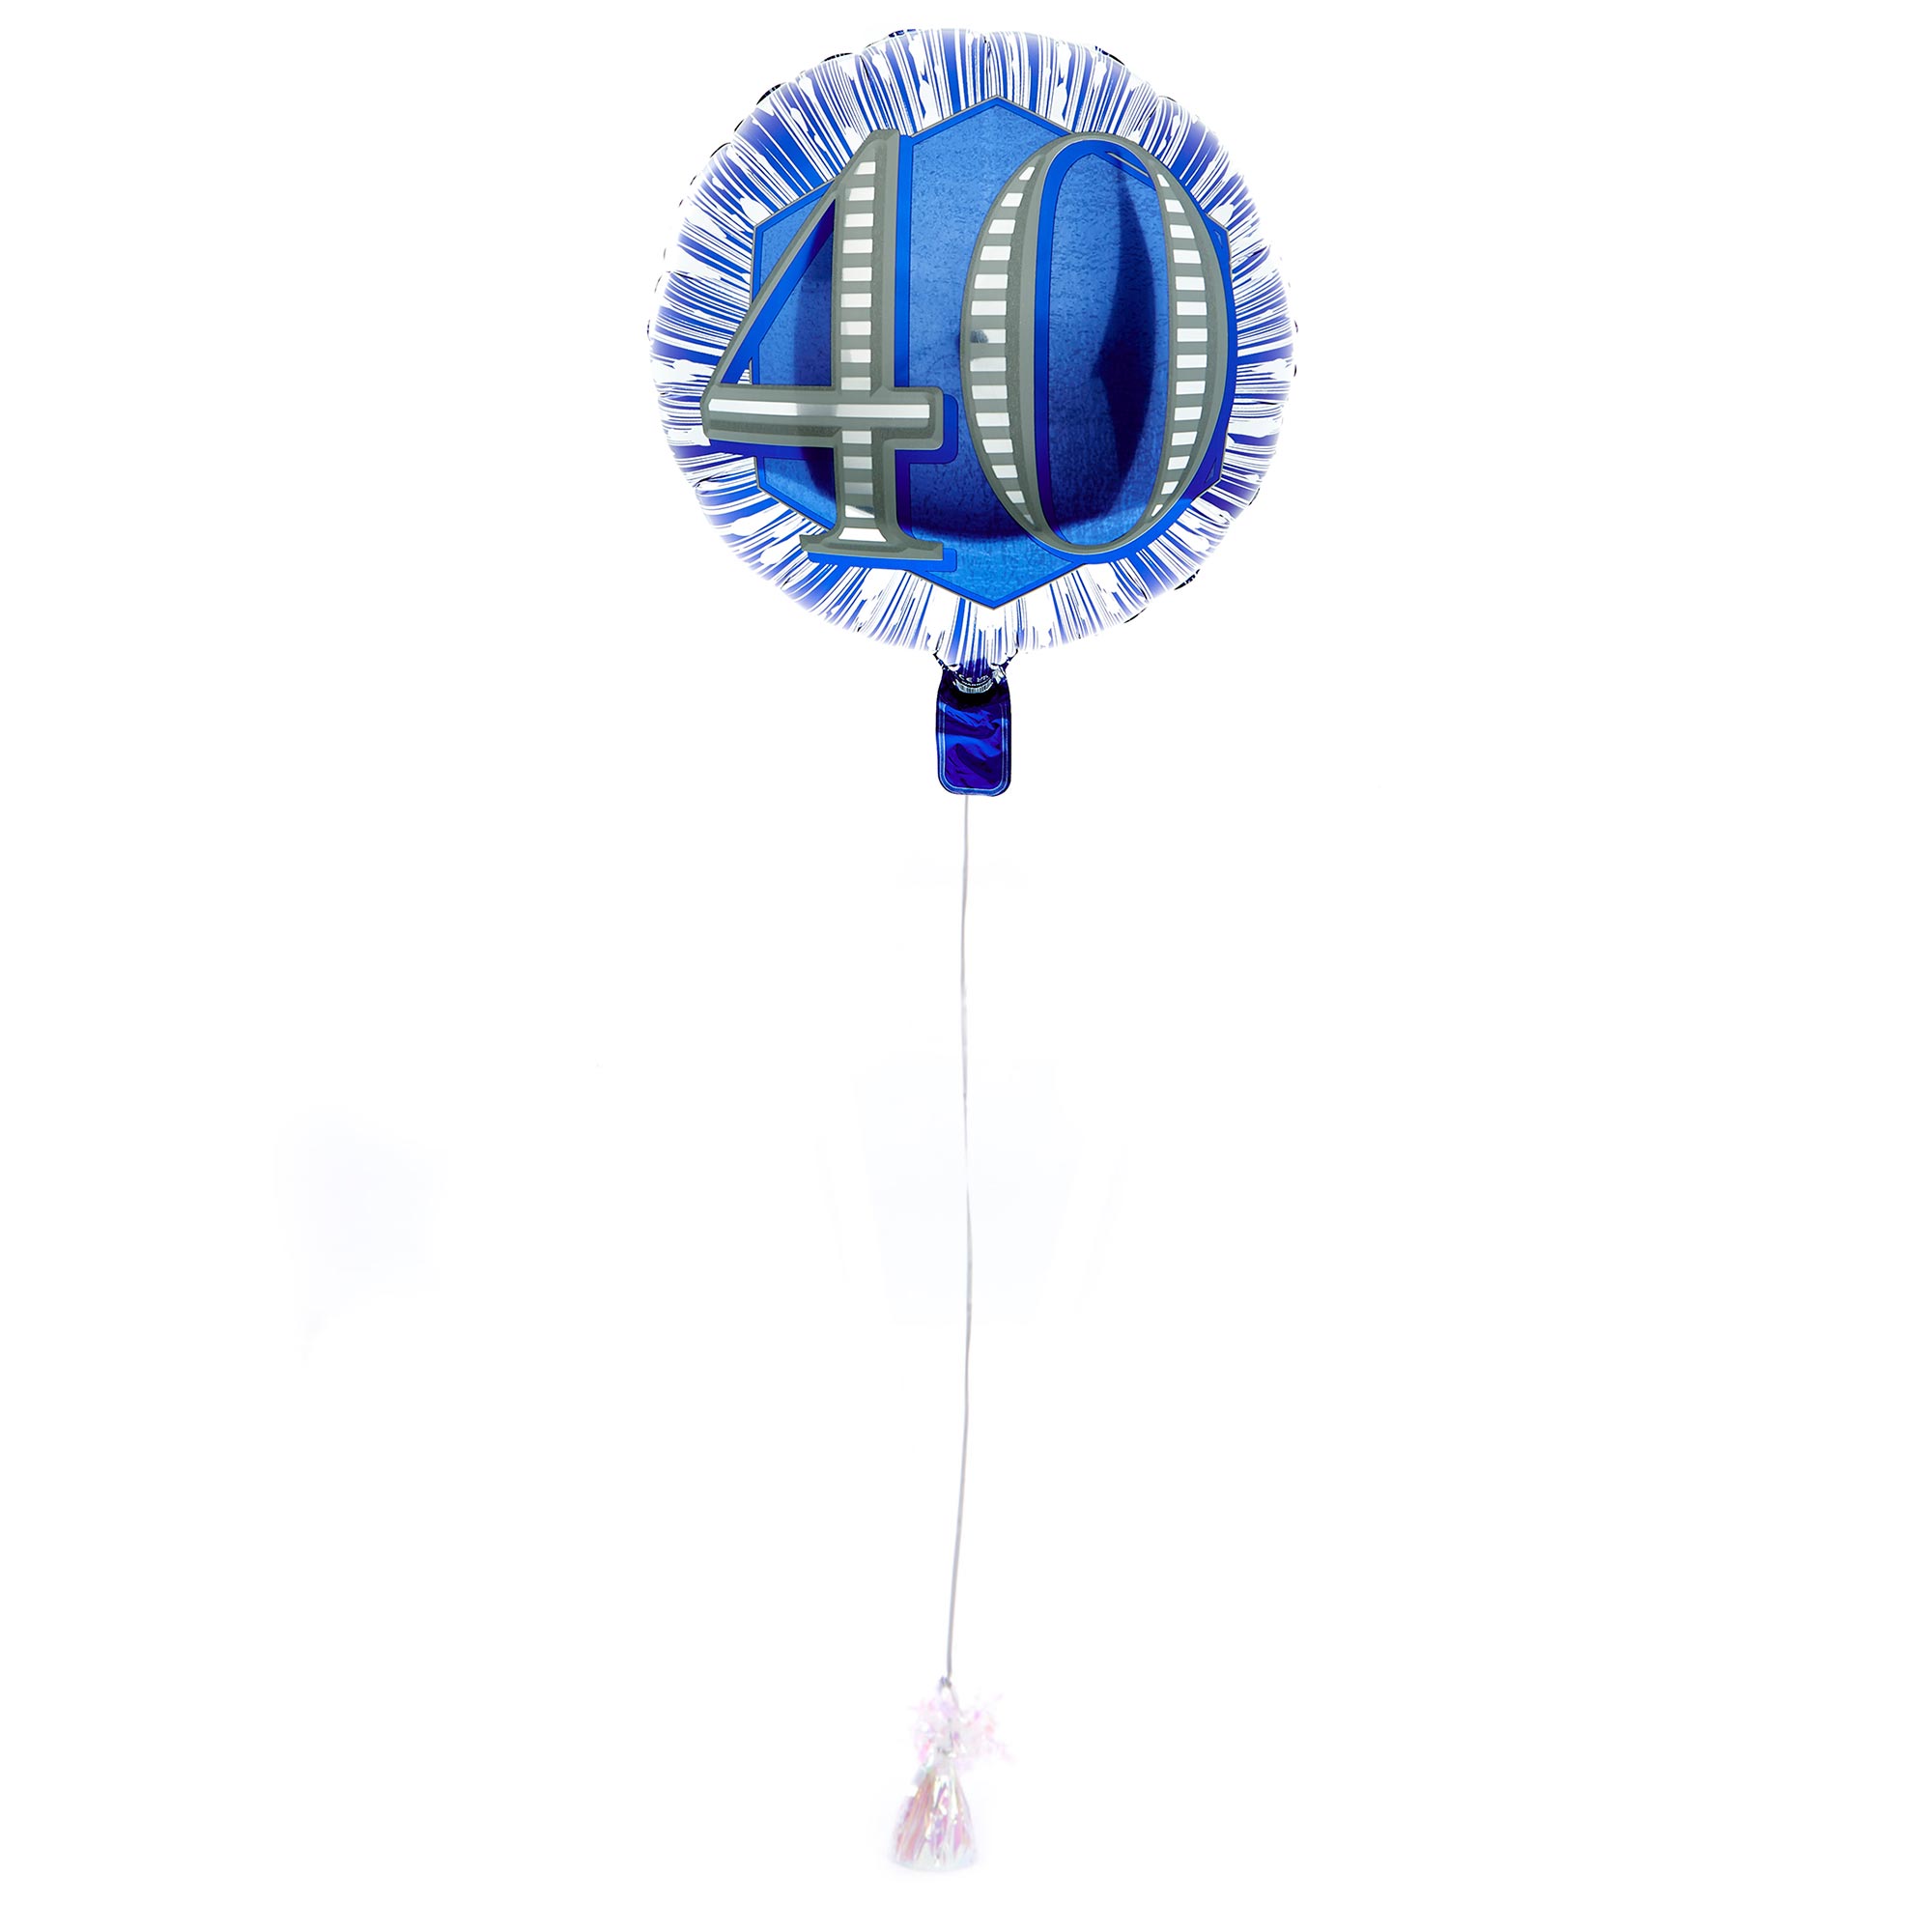 Blue & Silver 40th Birthday Balloon & Lindt Chocolate Box - FREE GIFT CARD!